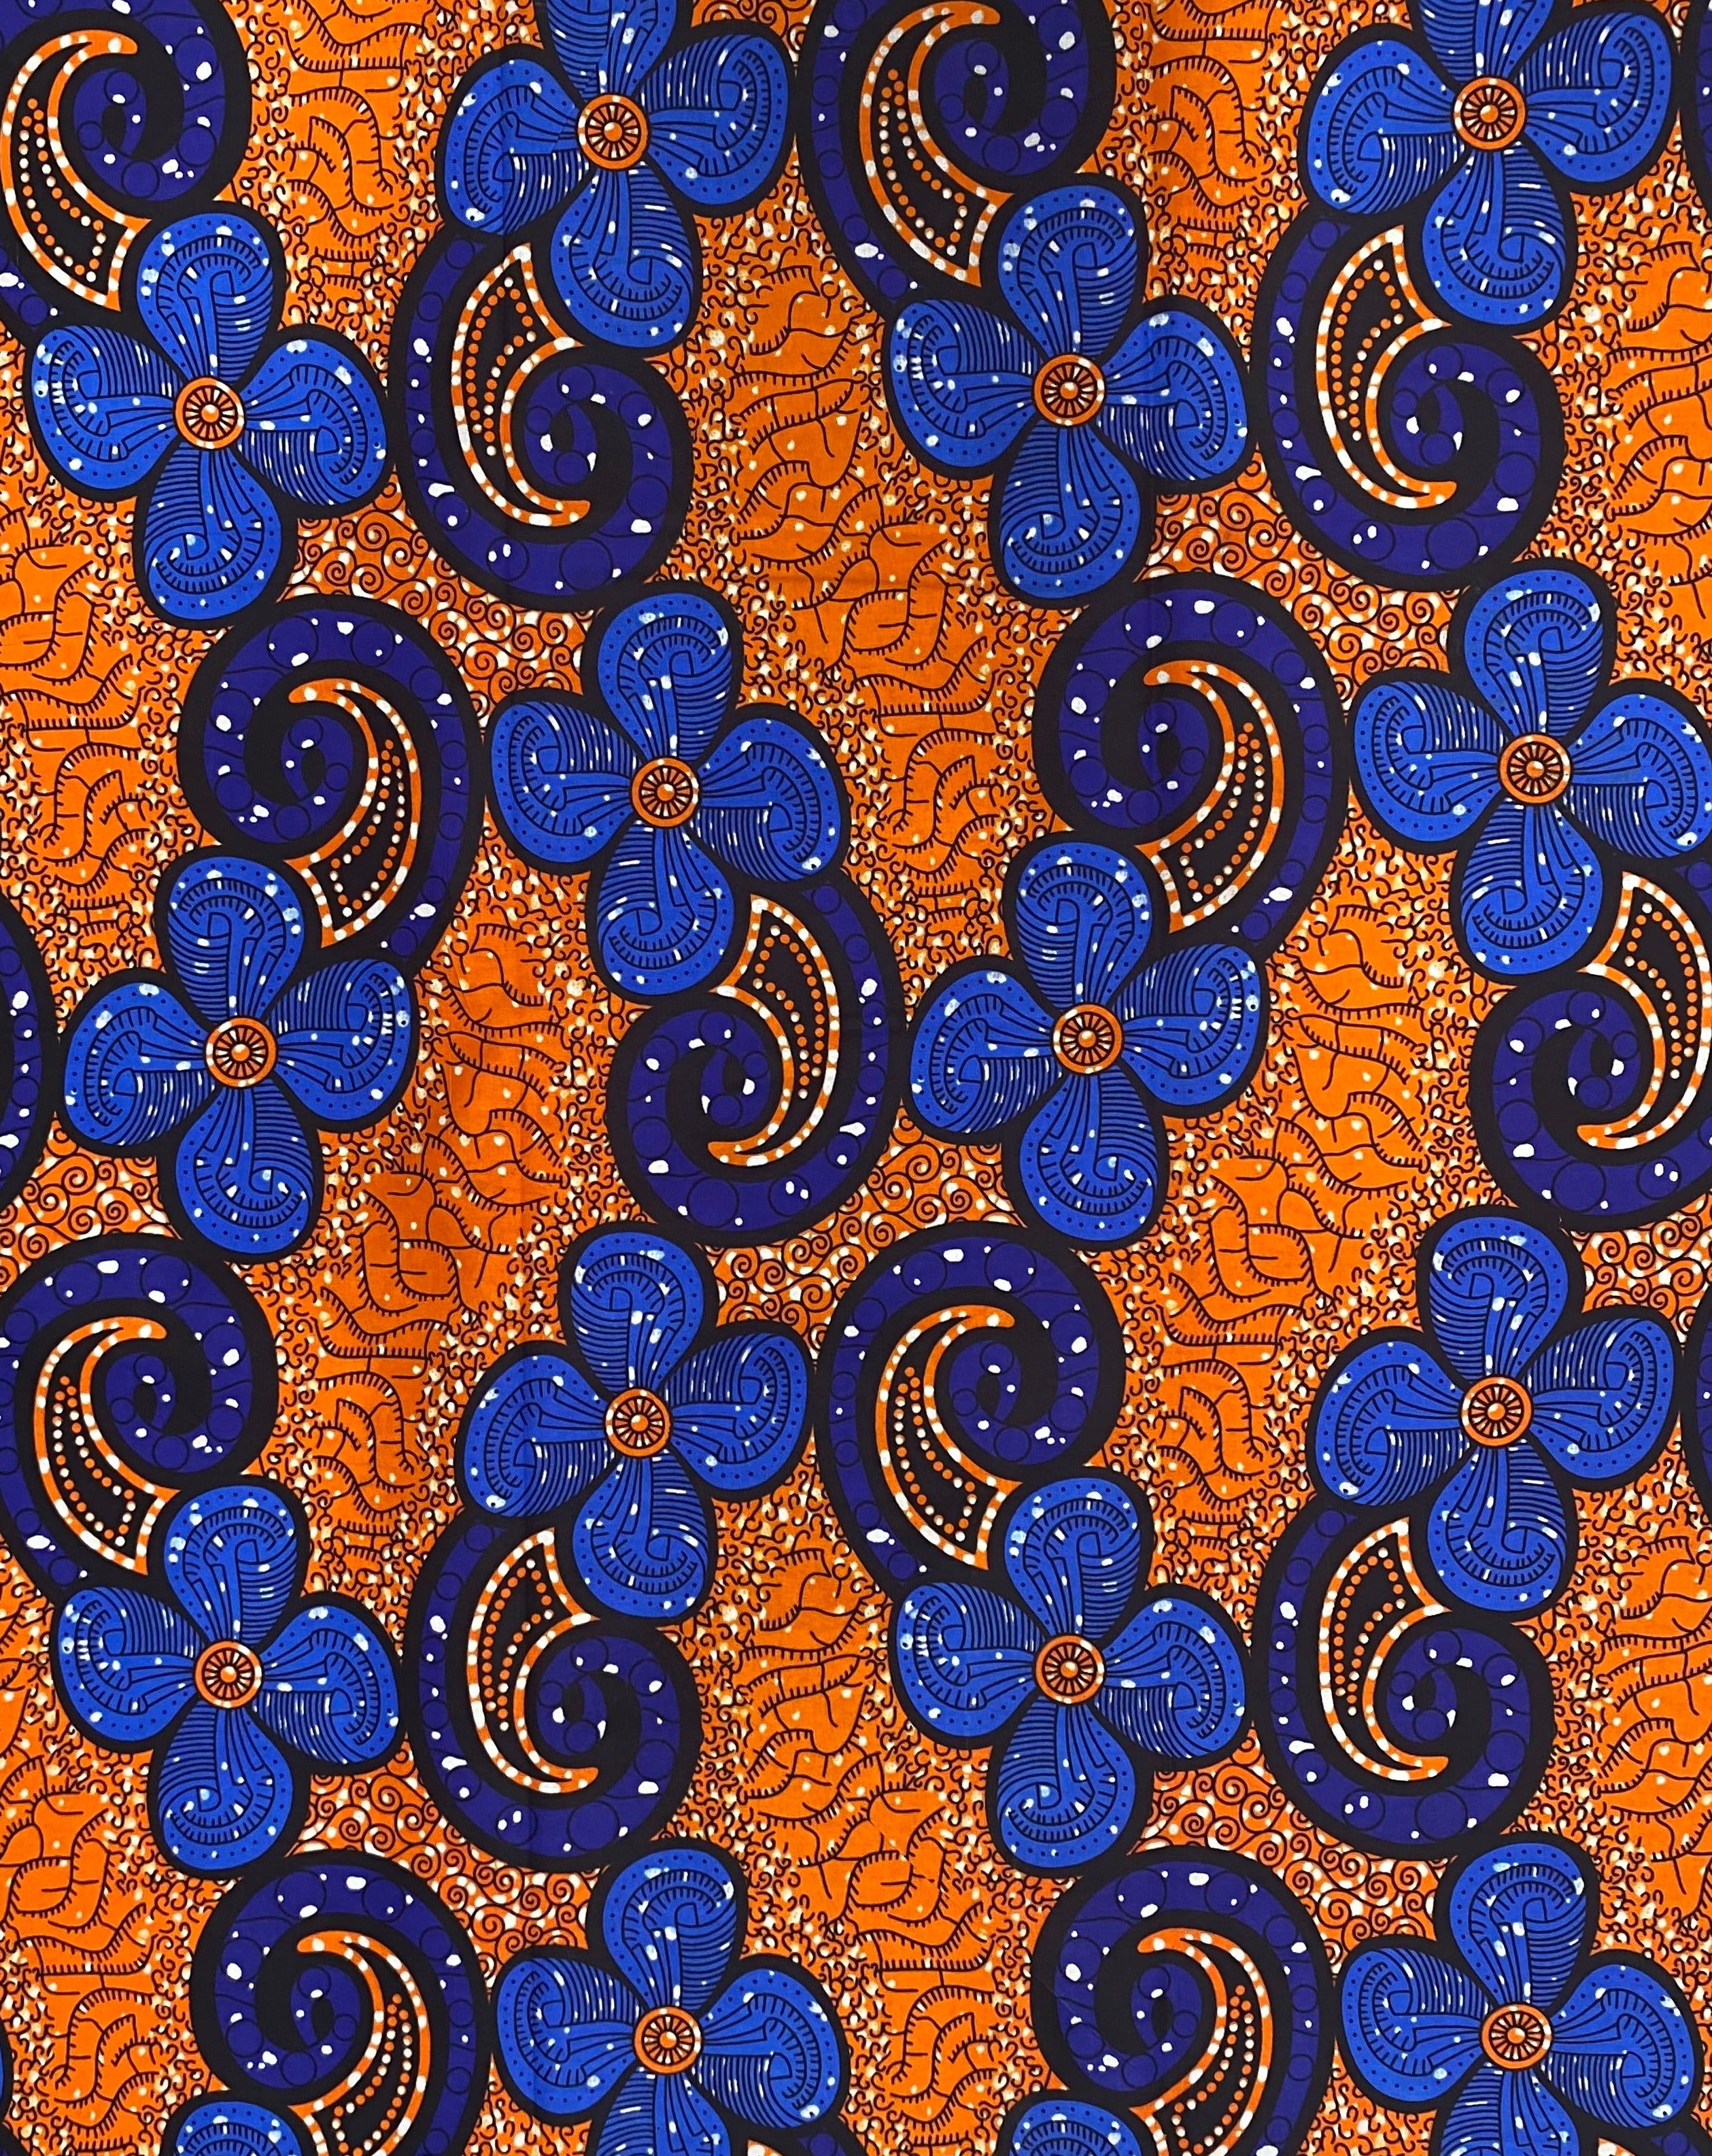 Tango Time African Print Fabric - 100% Cotton, 44" Wide, Rhythmic and Bold